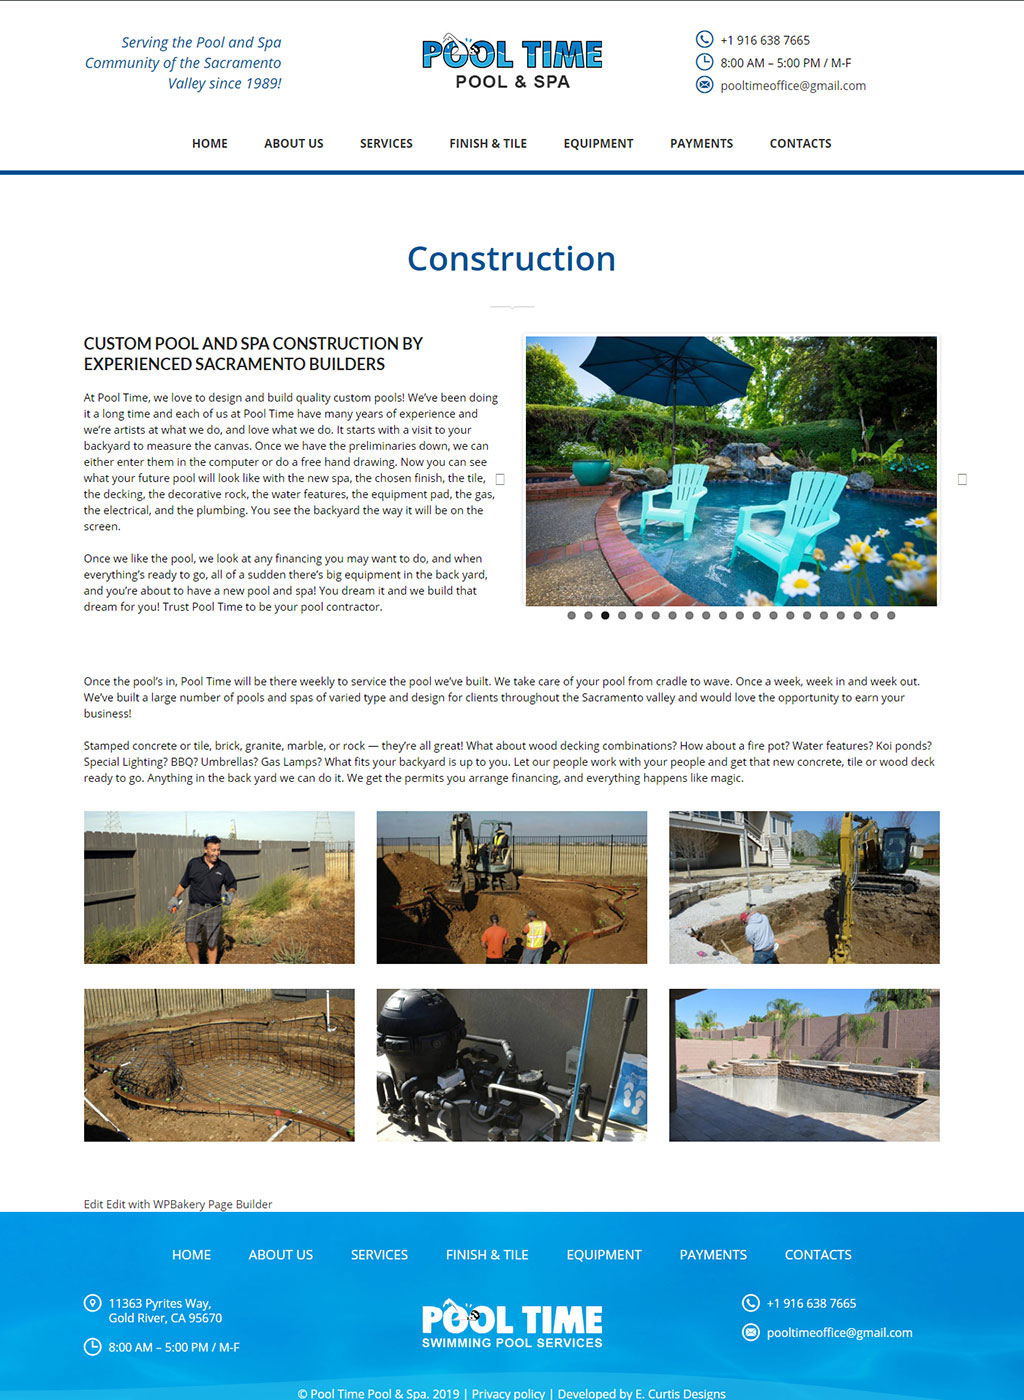 Pool construction page developed for Sacramento pool and spa business